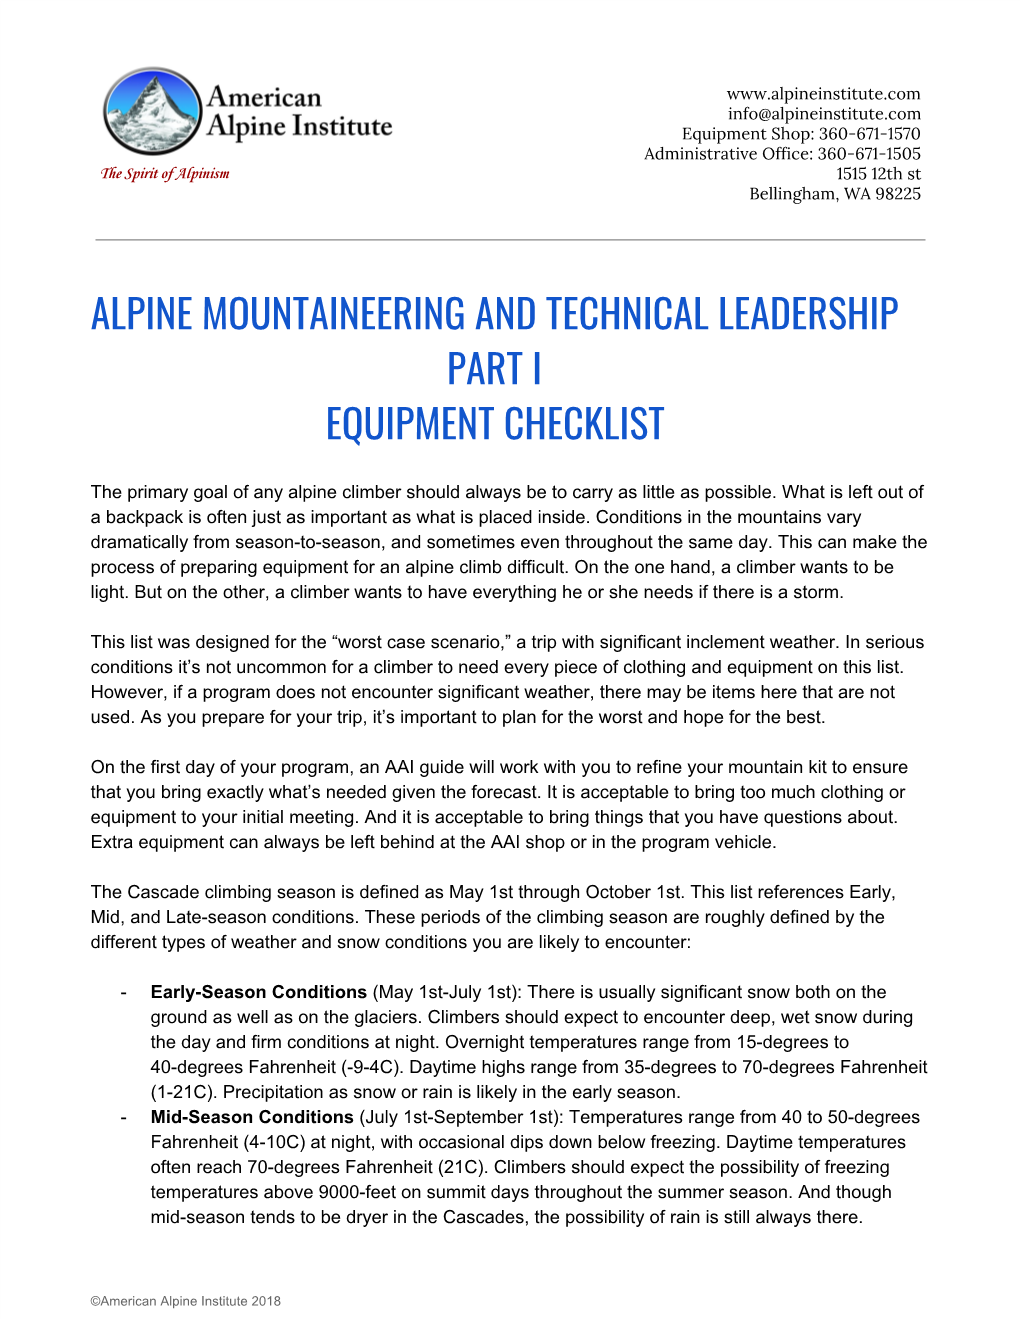 Alpine Mountaineering and Technical Leadership Part I Equipment Checklist